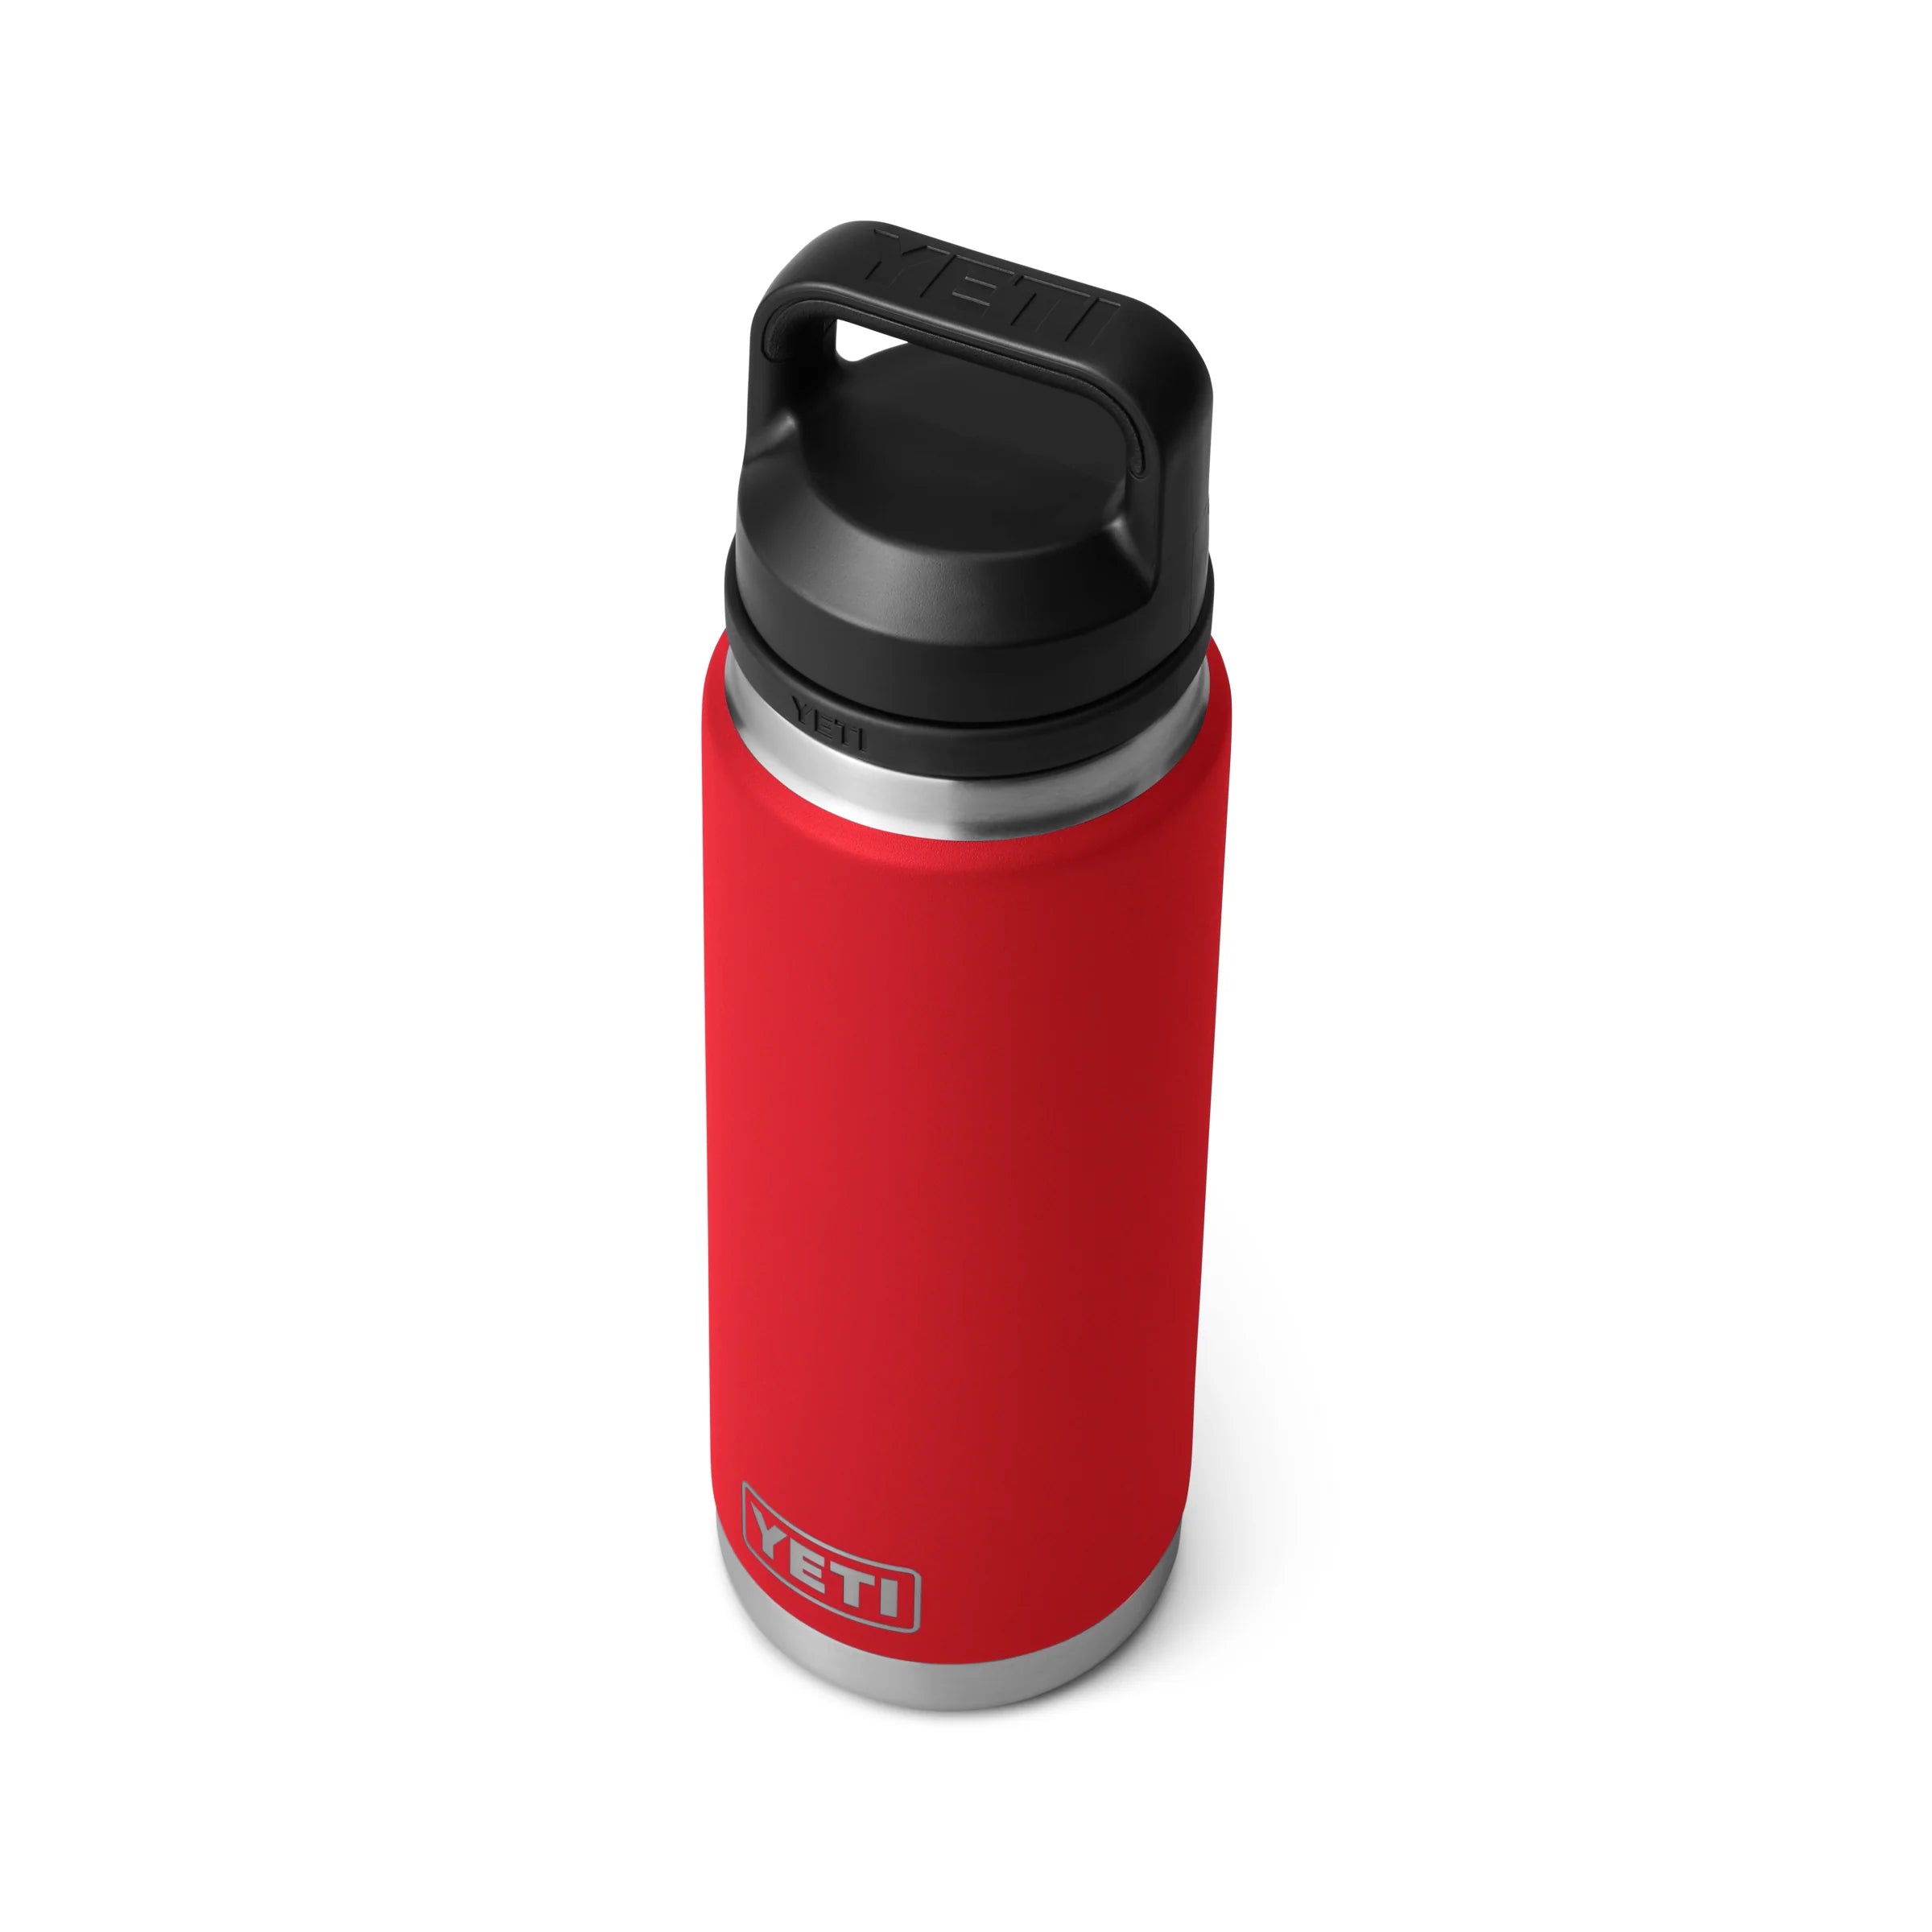 Rambler 26 oz Bottle with Chug cap in Rescue Red - YETI